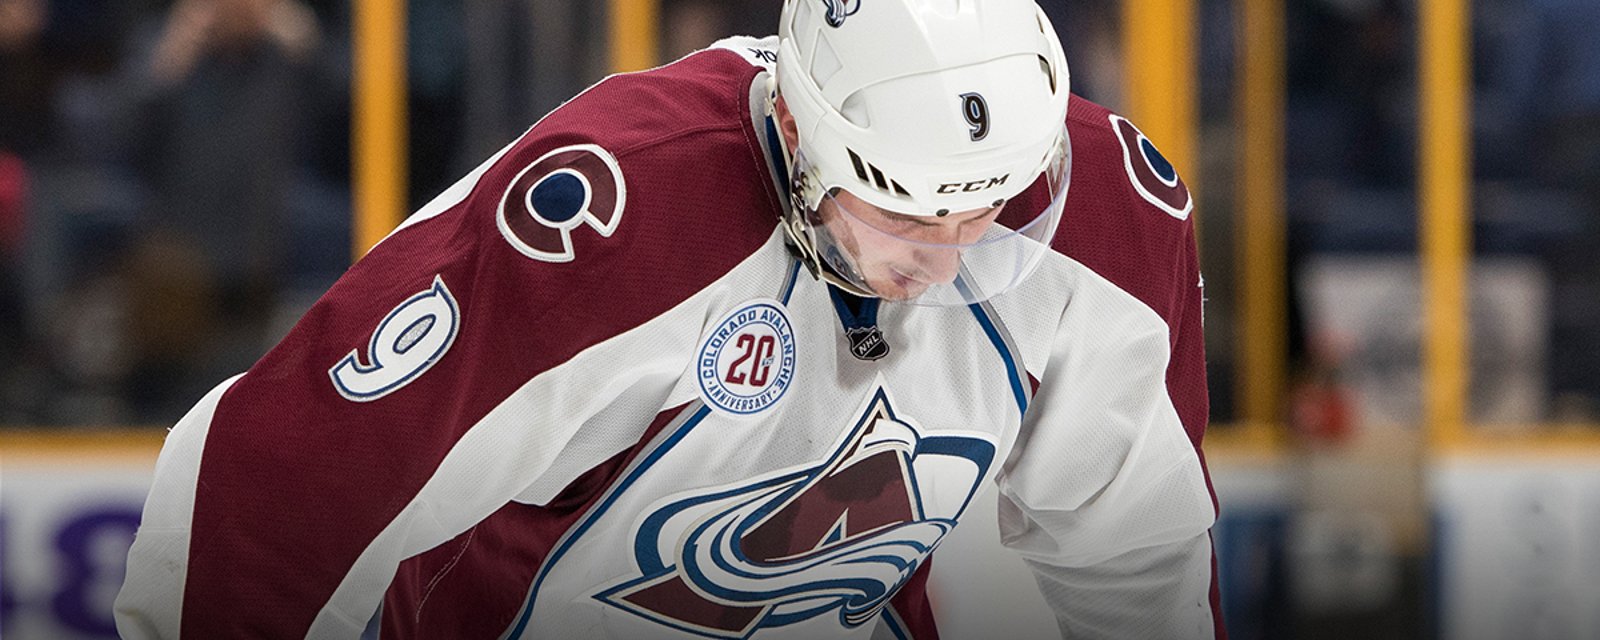 Report: Duchene to be traded before Avs training camp